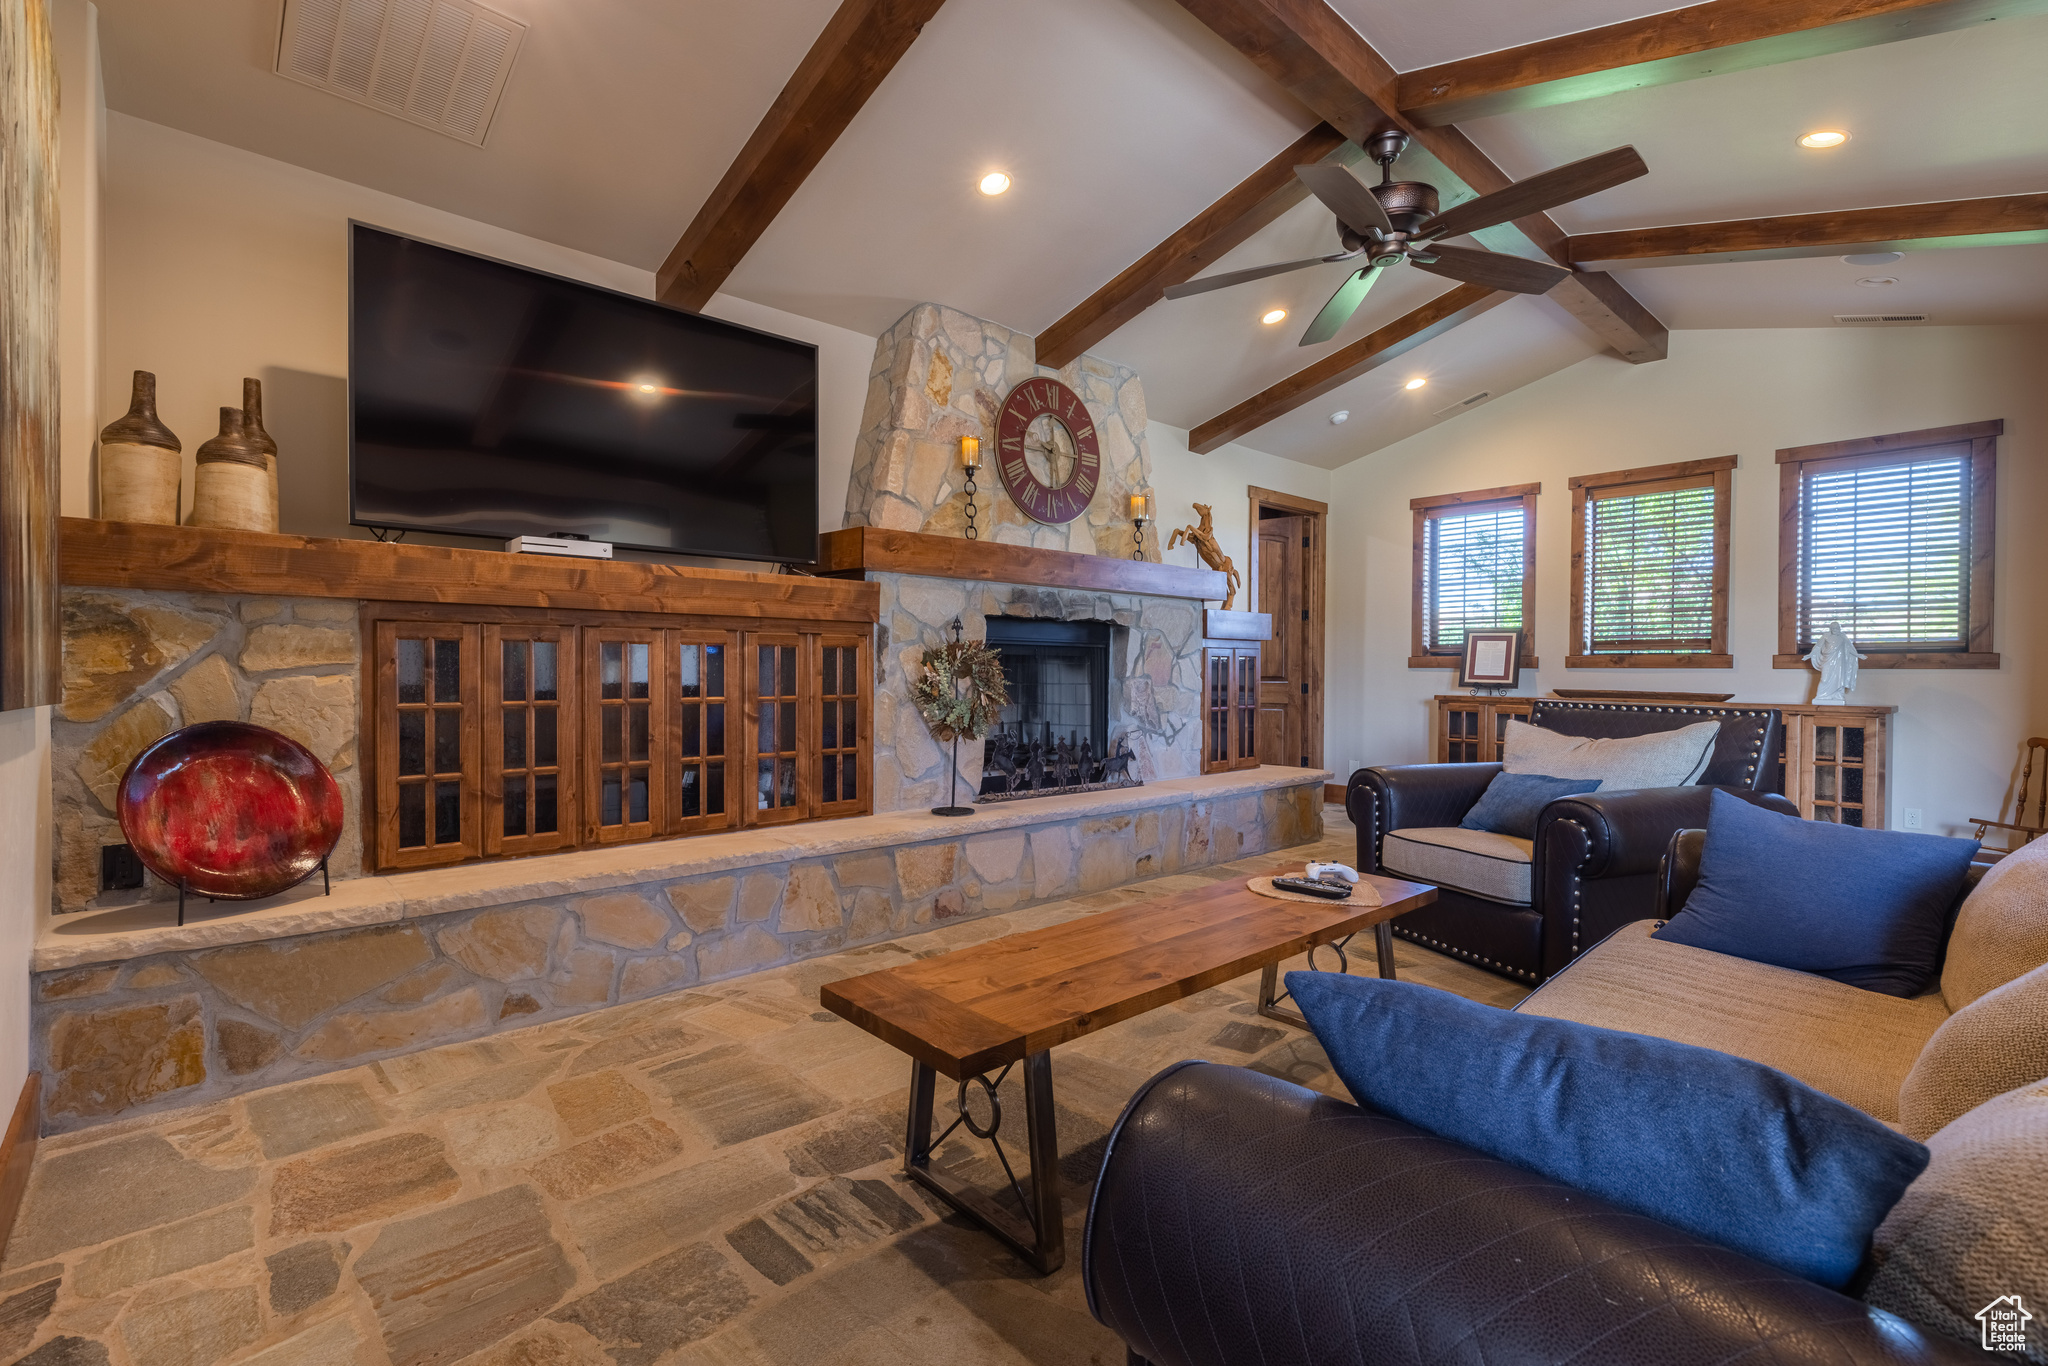 Great room with the Nevada slate flooring, lots of custom built-ins, ceiling fan, a fireplace, and lofted ceiling with beams